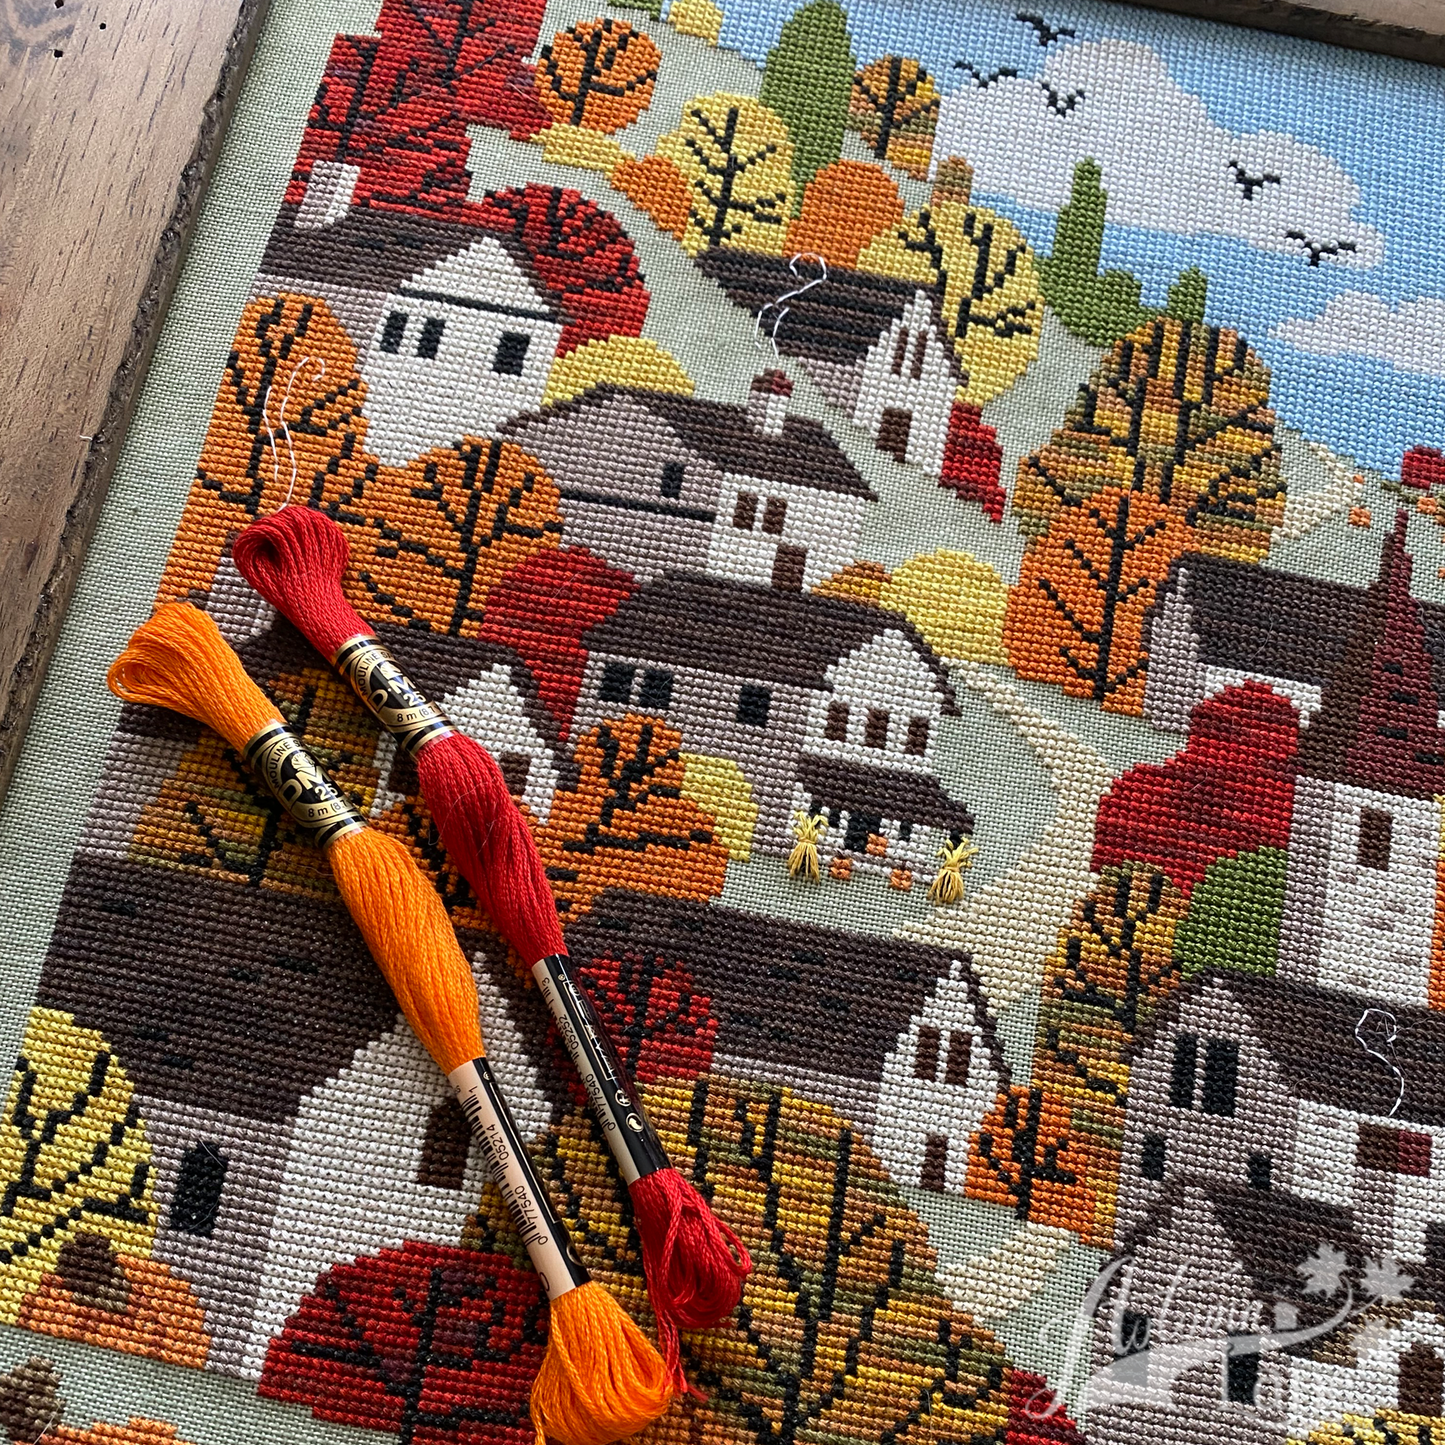 Autumn Towne Cross Stitch Pattern - Physical Leaflet